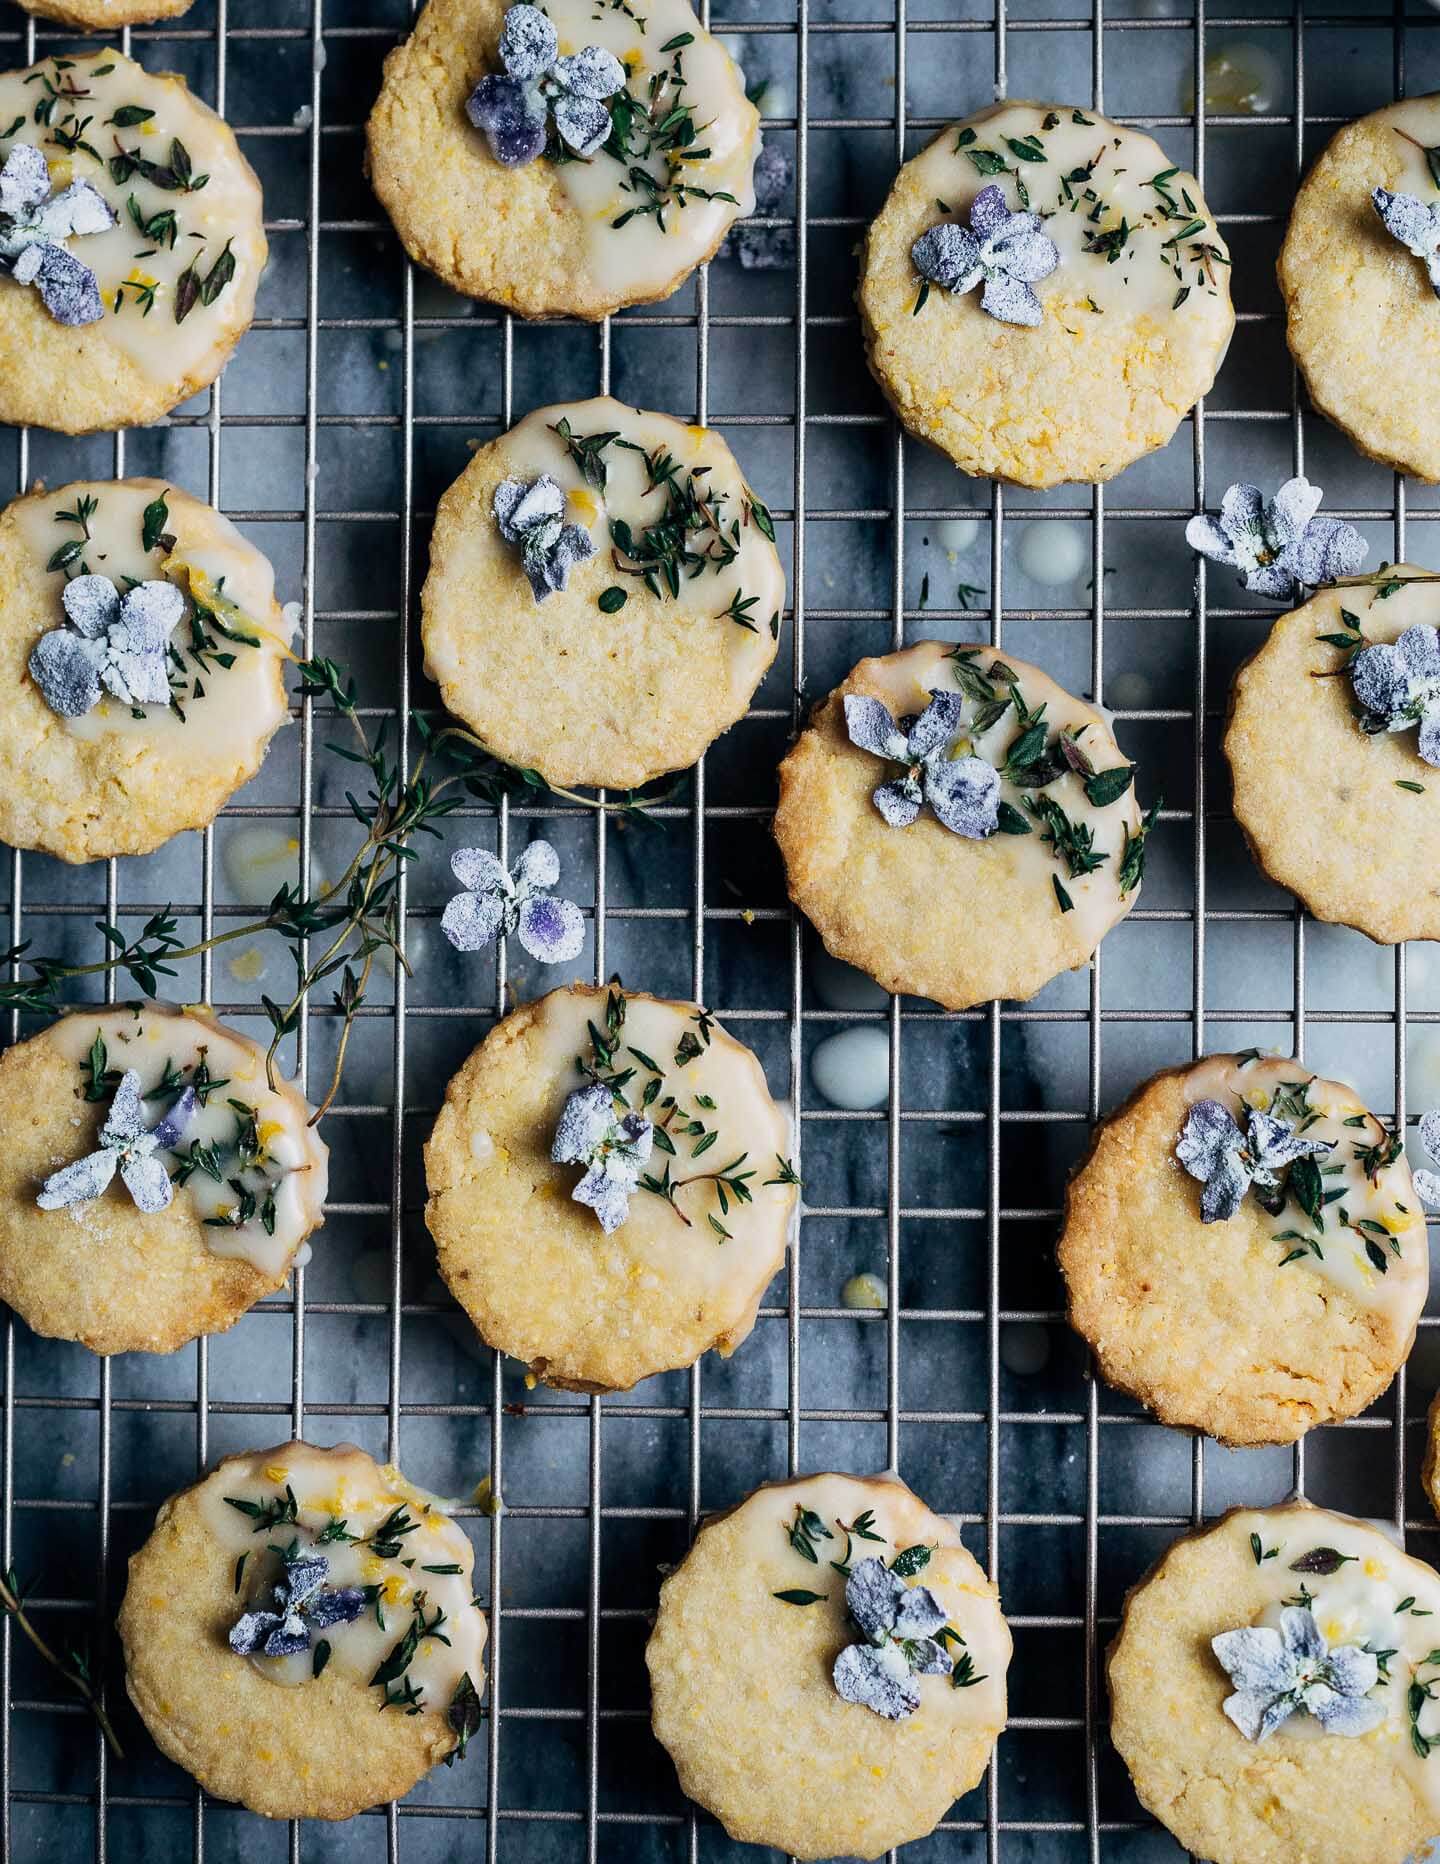 These buttery polenta cookies with a lemony cookie icing, fresh thyme leaves, and candied violets capture the flavors of early spring beautifully.